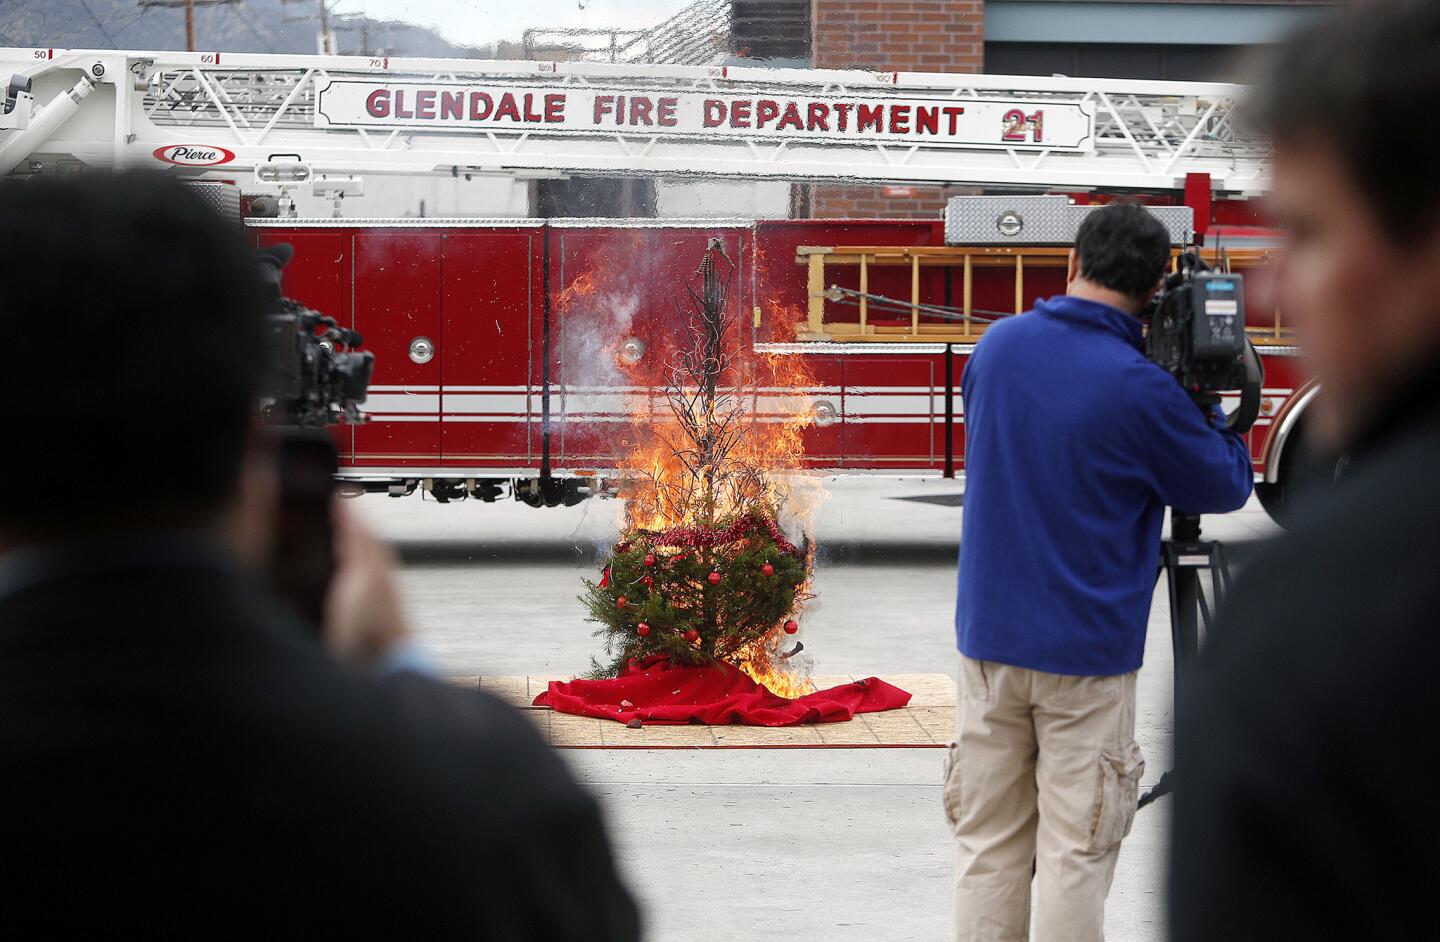 Media make video of a burning Christmas tree at Glendale Fire Station 21 on Monday, December 10, 2018. The media event, put together by The Glendale Fire Department and California Poison Control, is to illustrate potential life-threatening hazards lurking around the holidays, including Christmas trees that are not sufficiently watered which become explosive and tremendously dangerous.